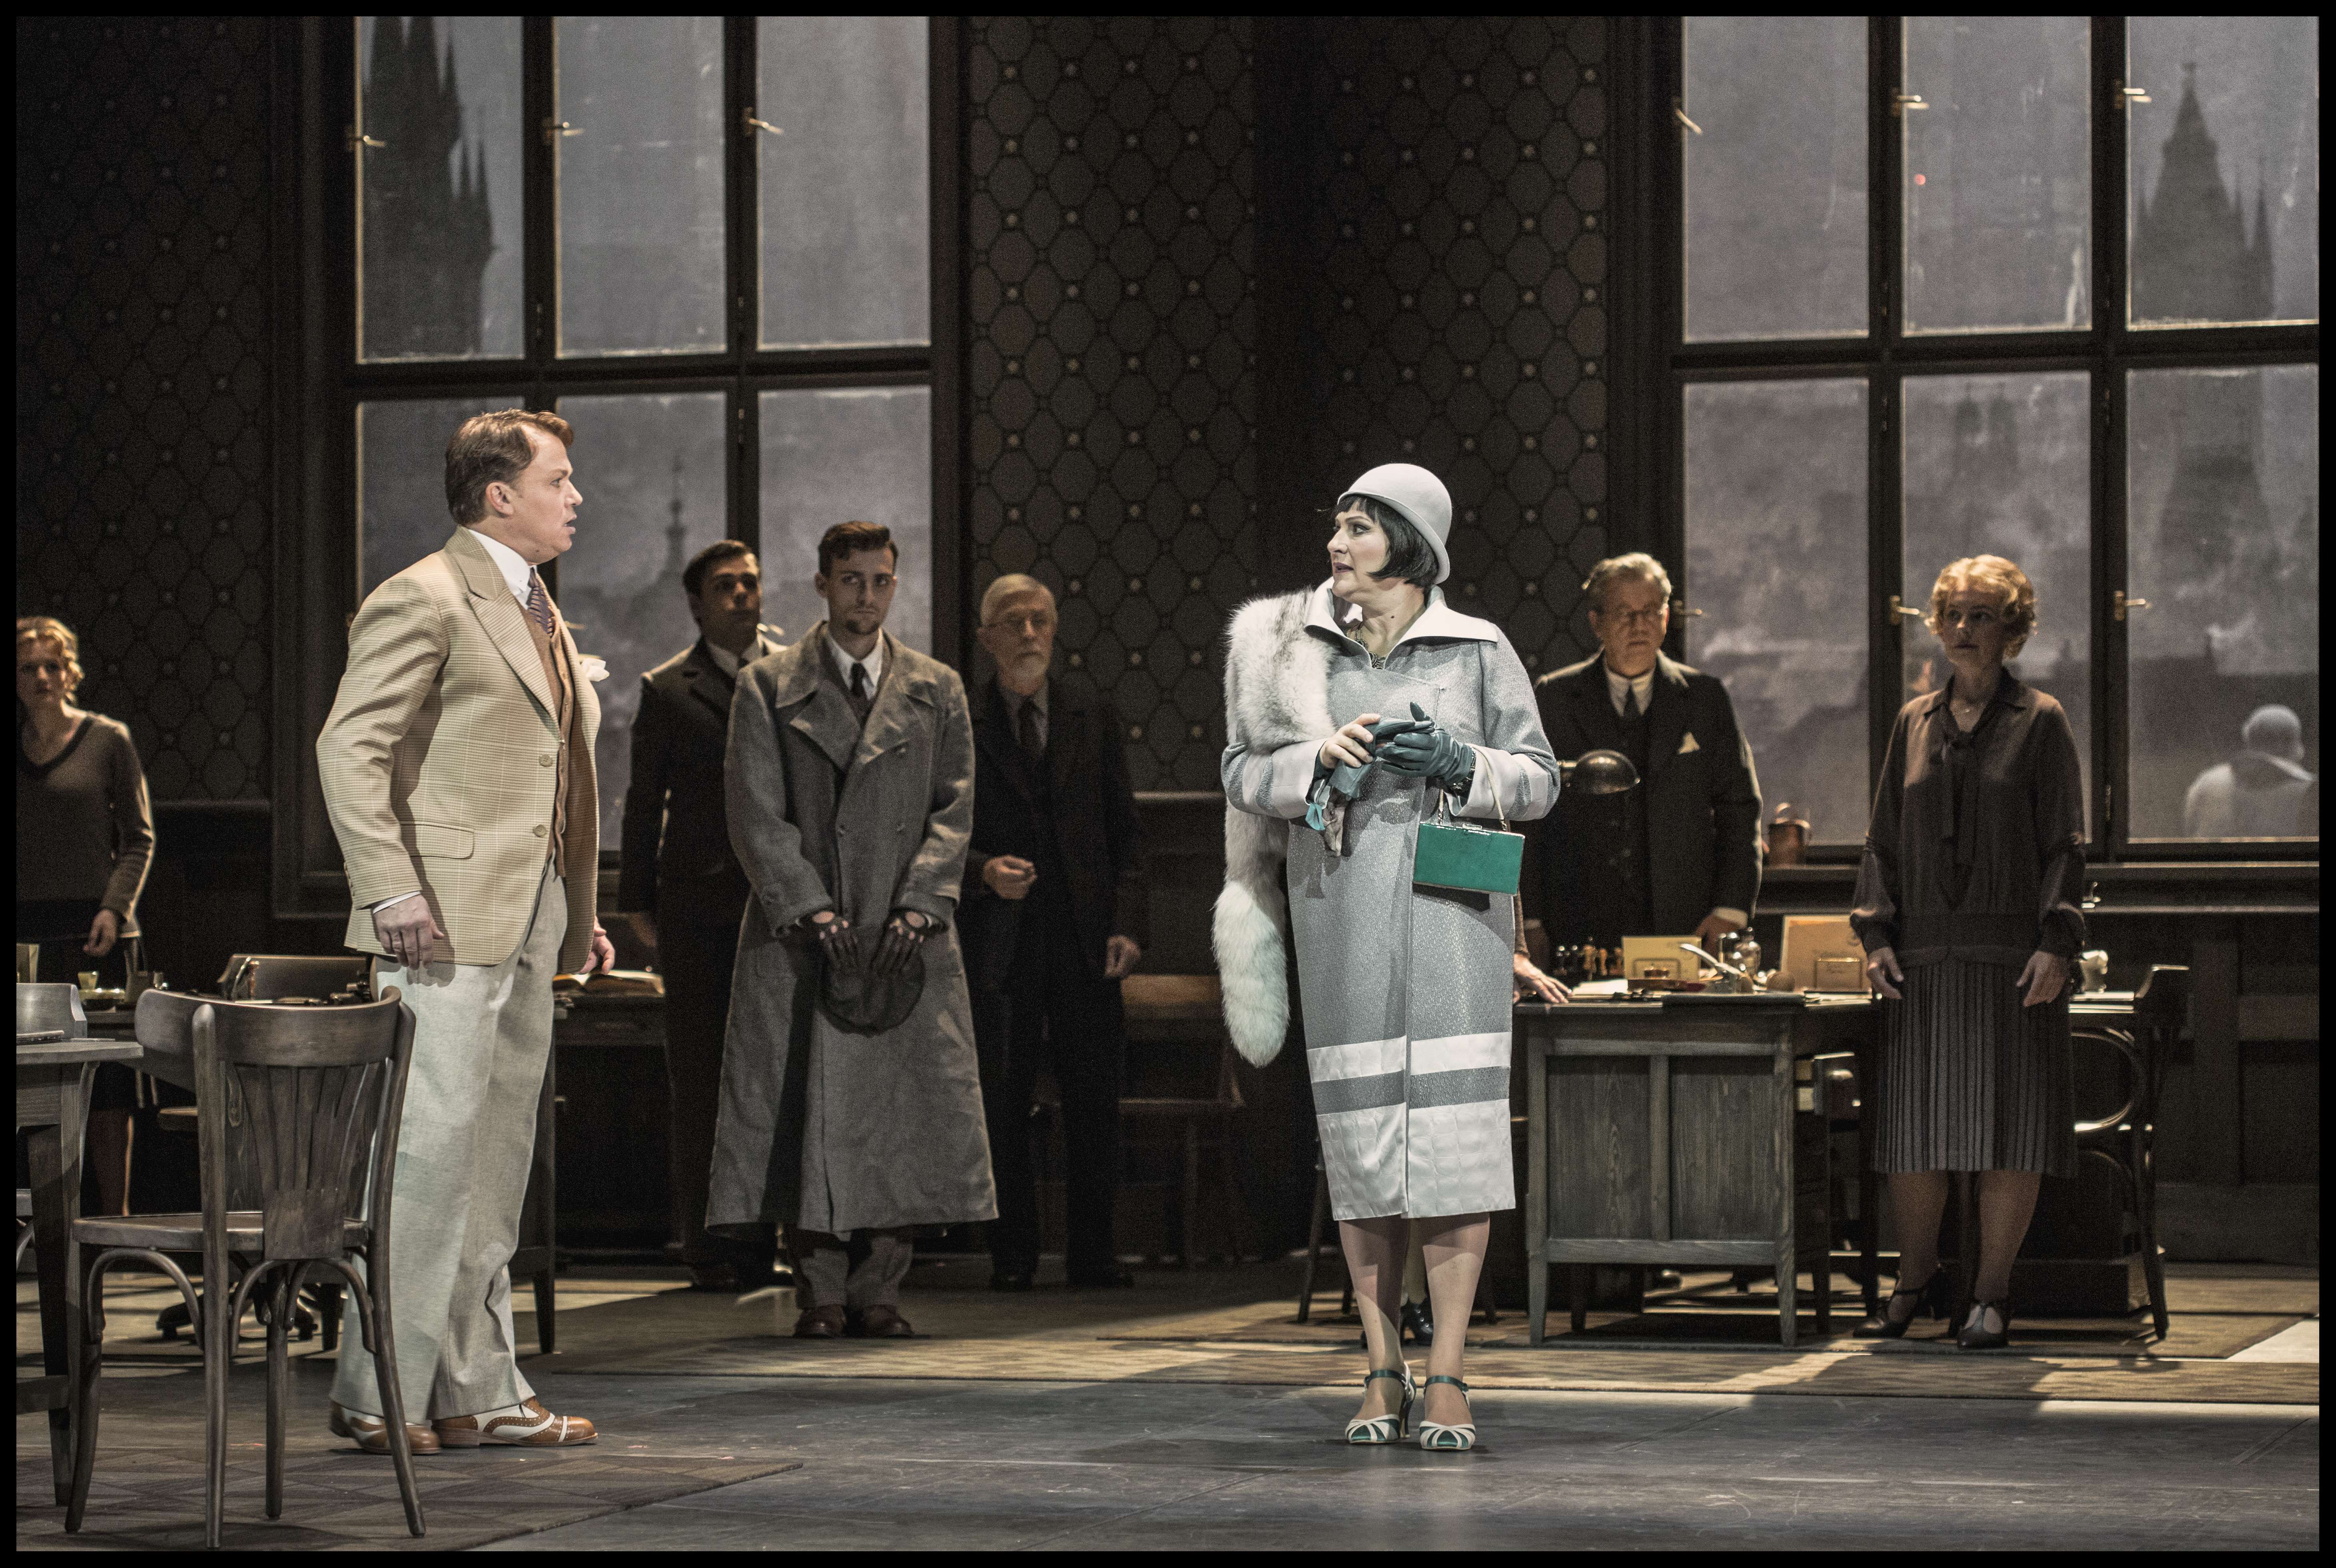 Annalena Persson’s performance as opera singer Emilia a standout in a successful undertaking in which staging and score flowed seamlessly and  the cast acted and sang with dramatic conviction